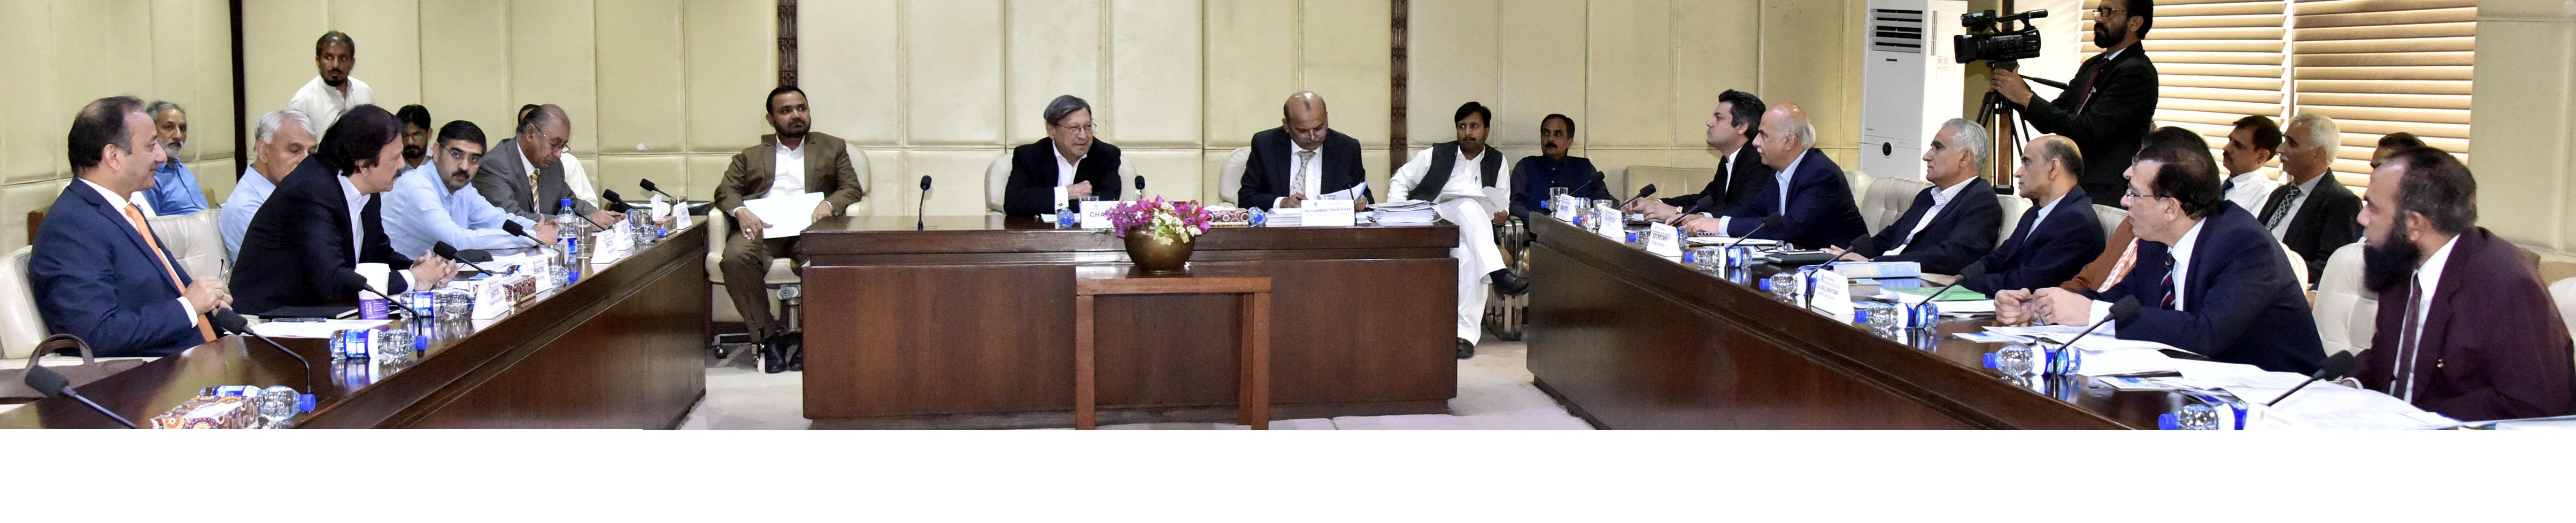 SENATOR FAROOQ HAMID NAEK, CHAIRMAN SENATE STANDING COMMITTEE ON FINANCE, REVENUE, ECONOMIC AFFAIRS PRESIDING OVER A MEETING OF THE COMMITTEE AT PARLIAMENT HOUSE, ISLAMABAD ON SEPTEMBER 24, 2018.